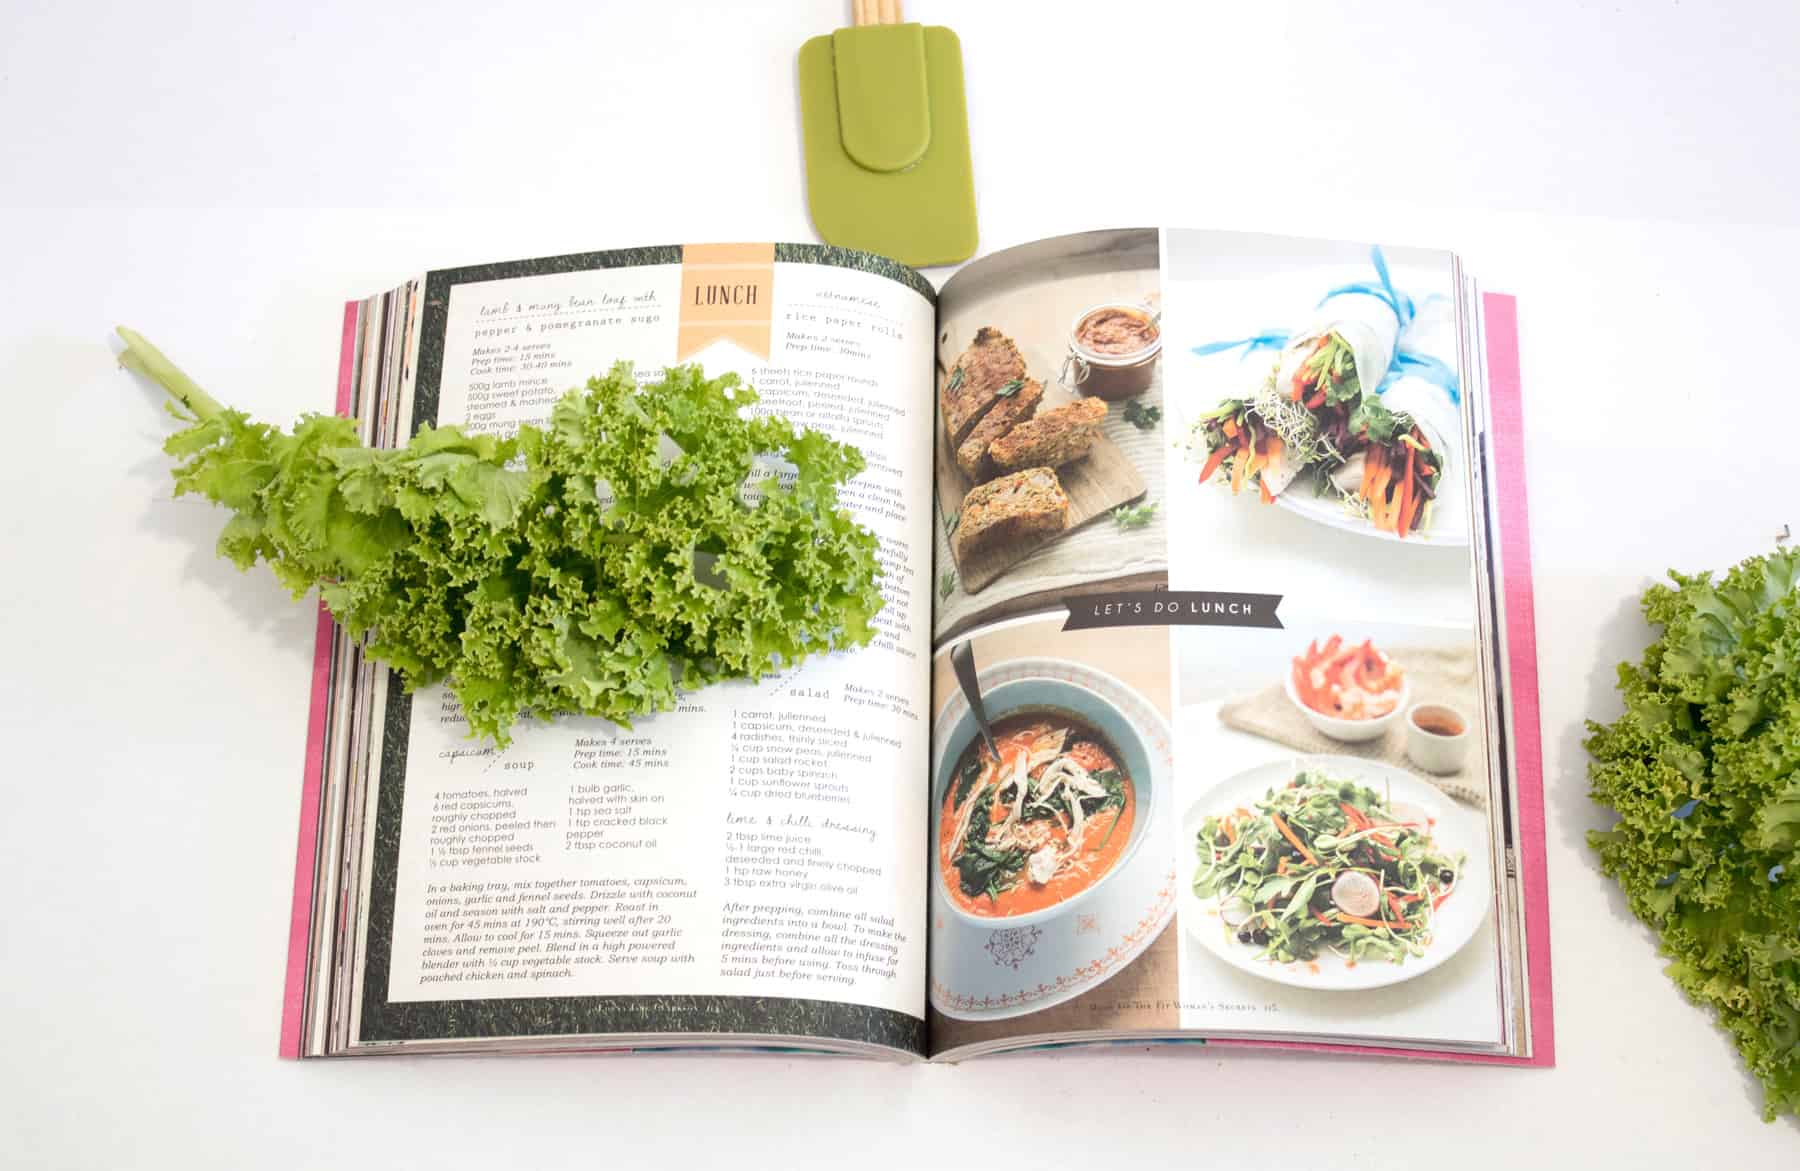 cook book on nutrition education